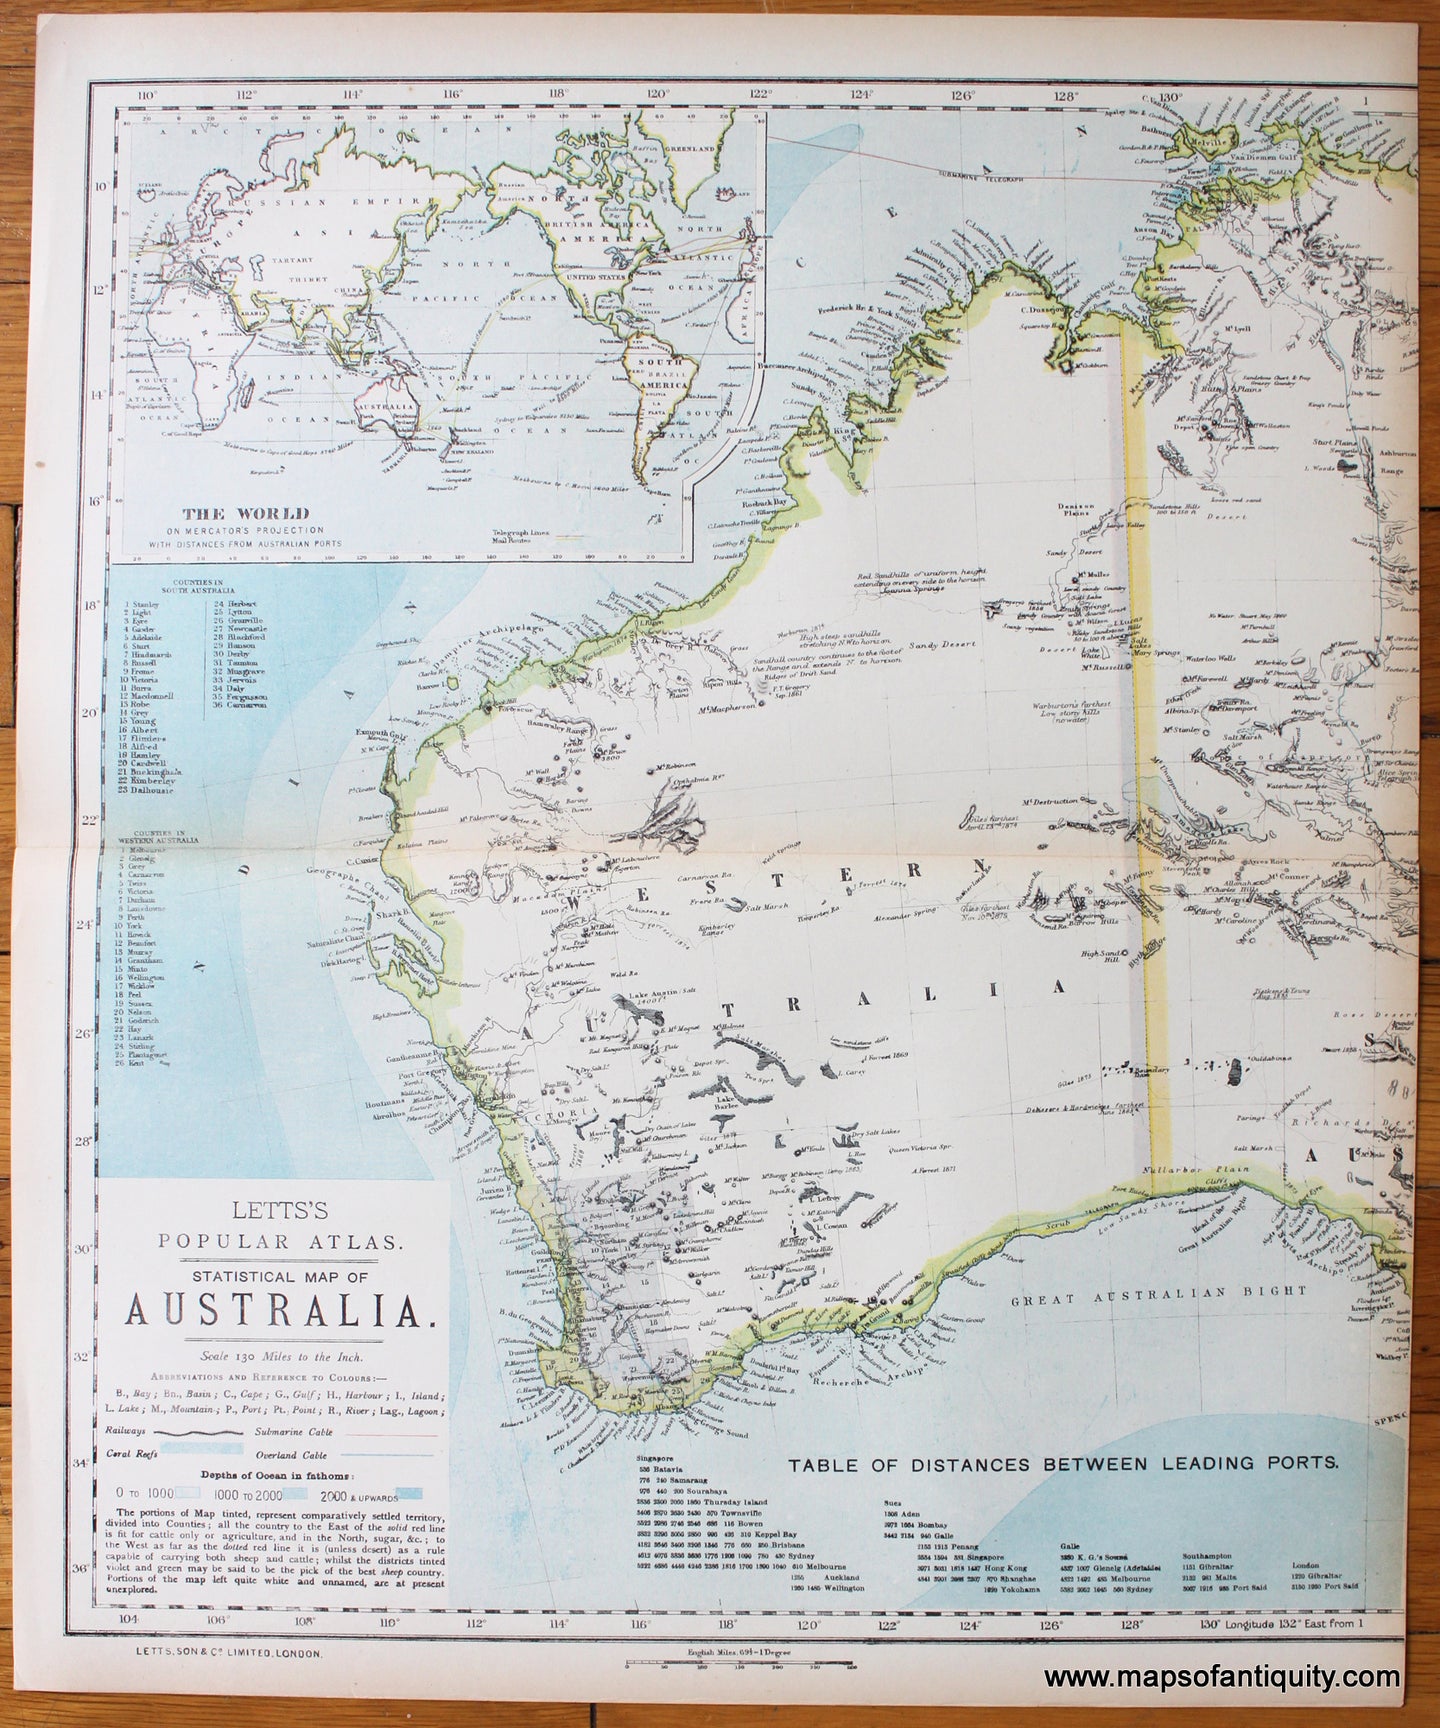 printed-color-Antique-Map-Statistical-Map-of-Australia-Australia-and-Pacific-Australia-1883-Letts-Maps-Of-Antiquity